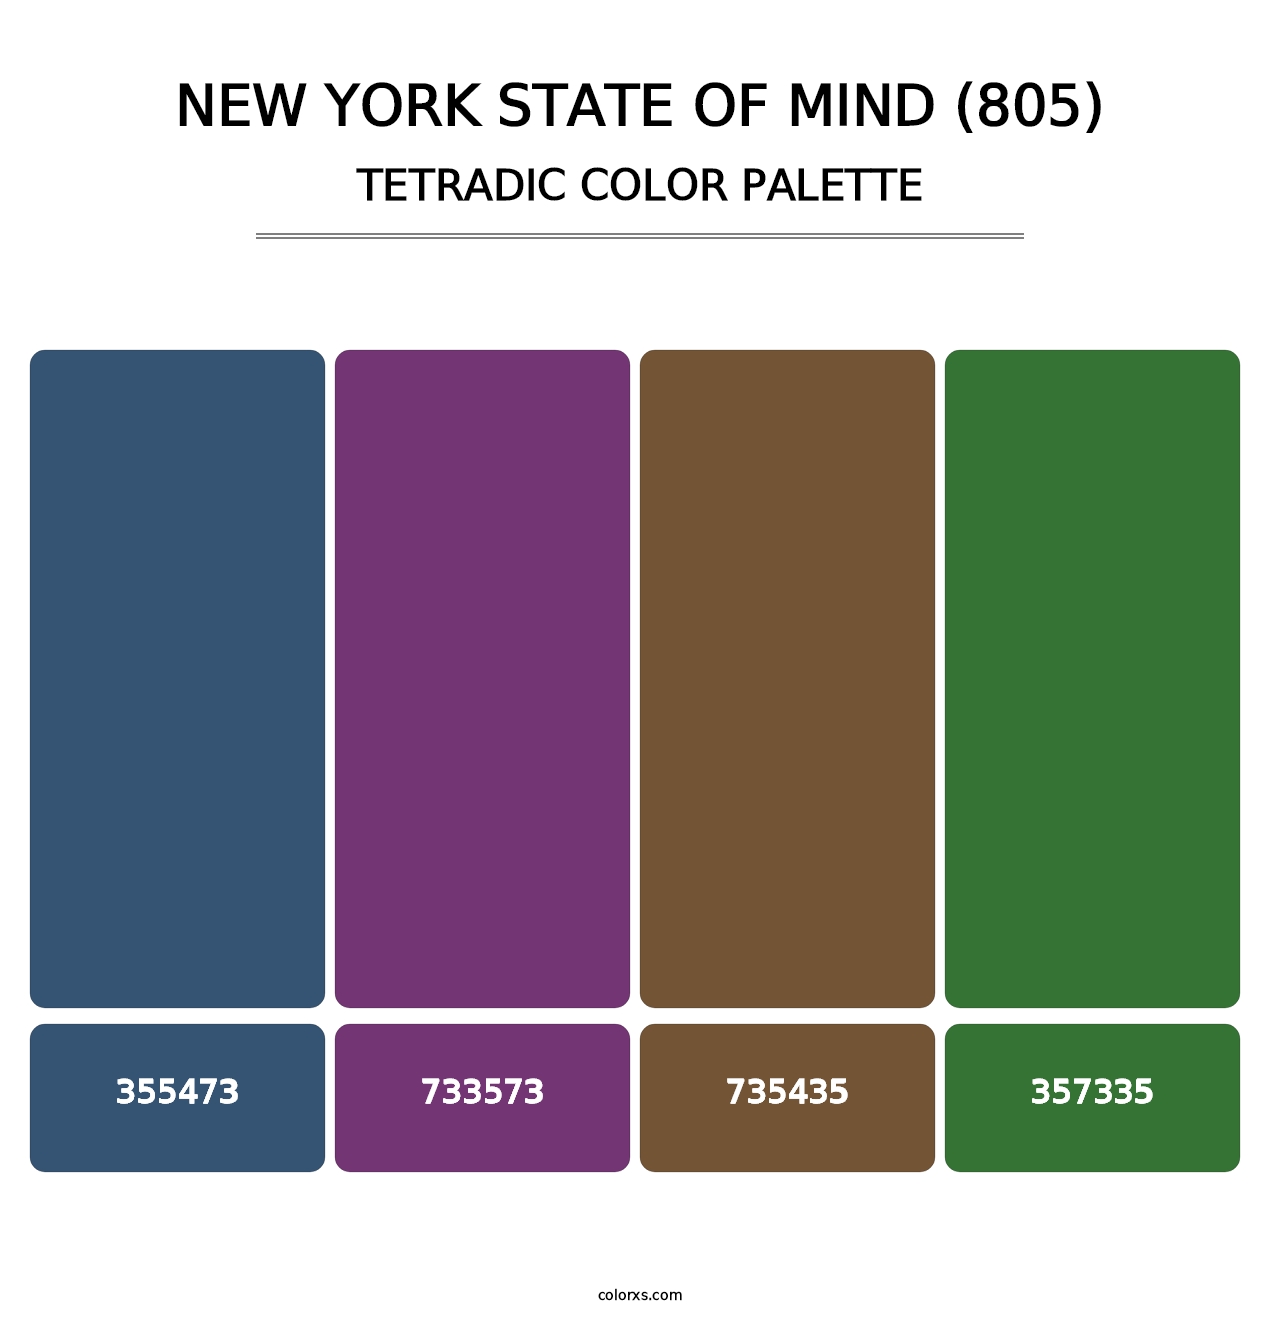 New York State of Mind (805) - Tetradic Color Palette